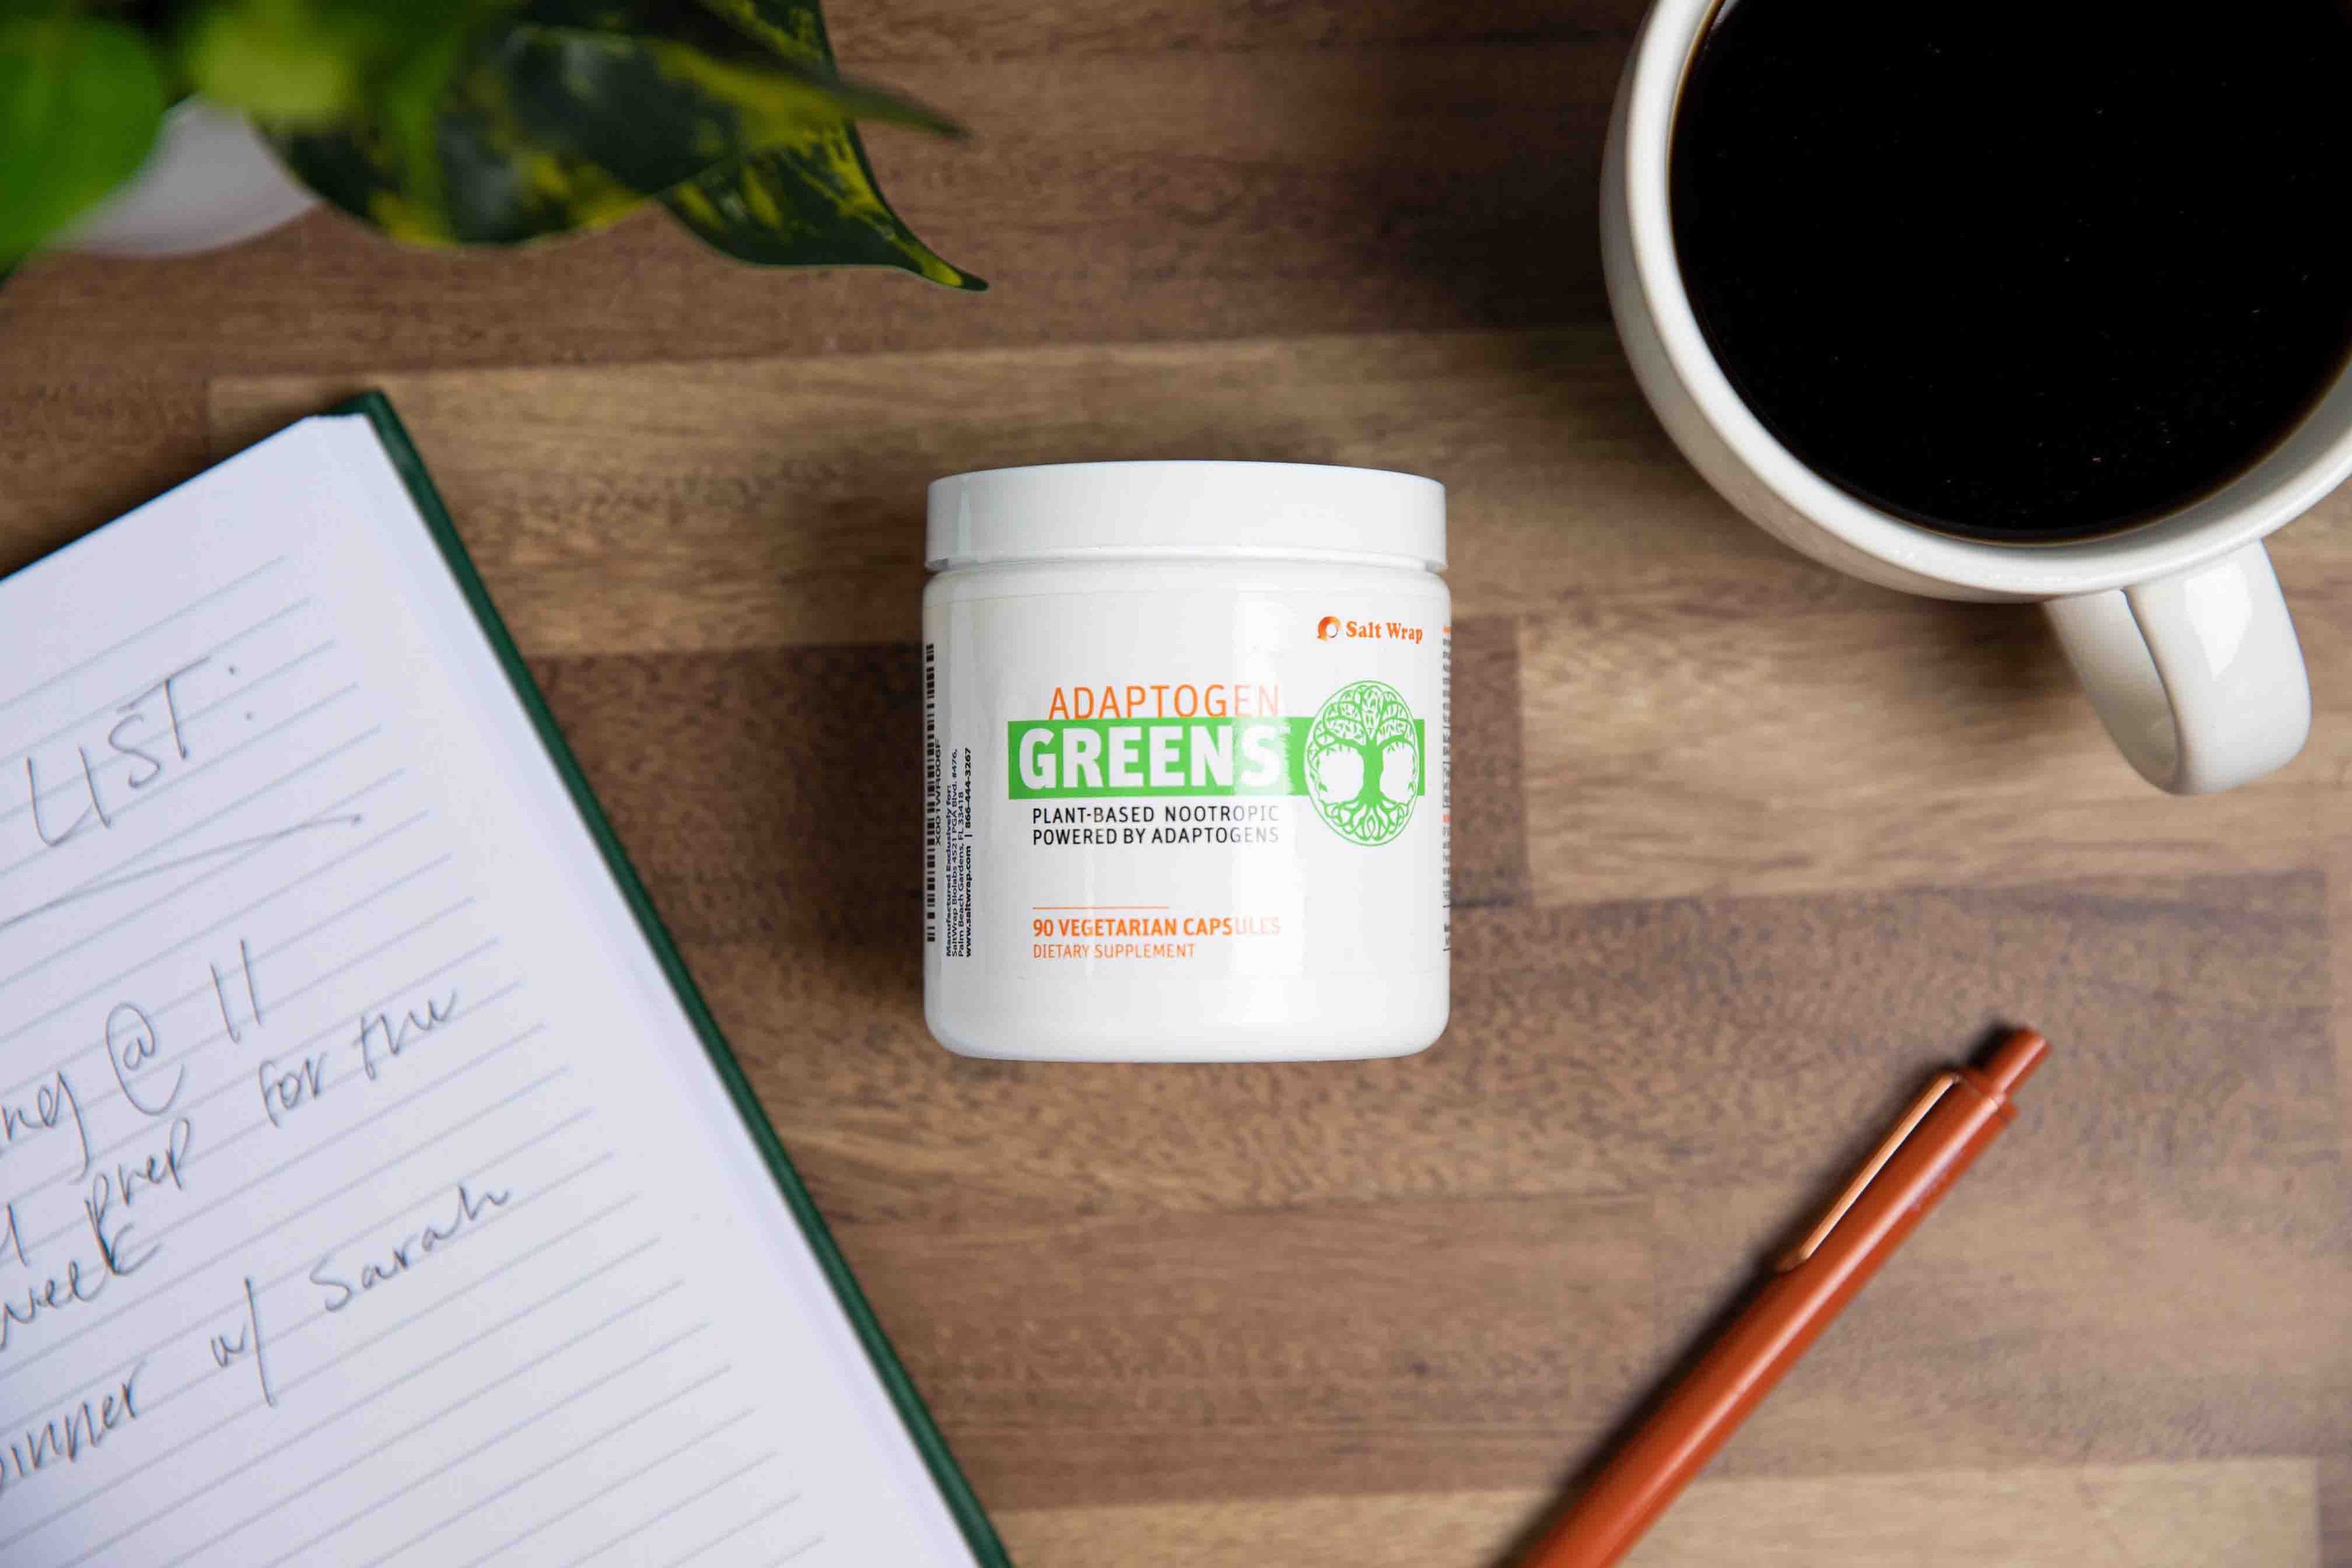 Adaptogen Greens™ delivers clinically supported results you can feel. Break the burnout cycle, banish fatigue, and unleash your true potential.